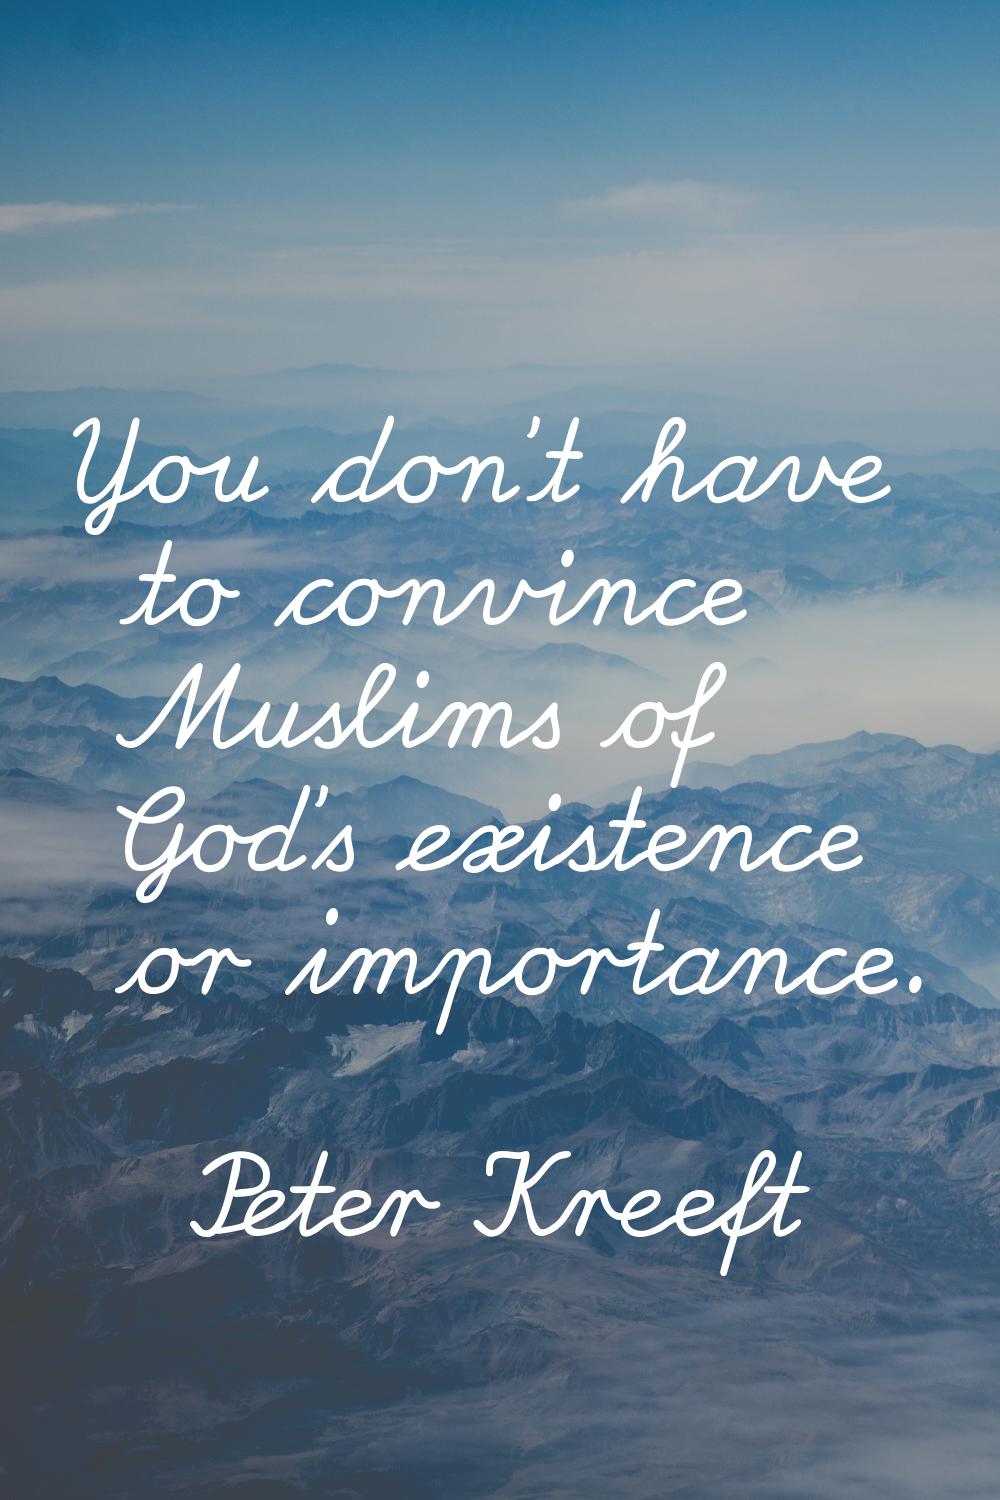 You don't have to convince Muslims of God's existence or importance.